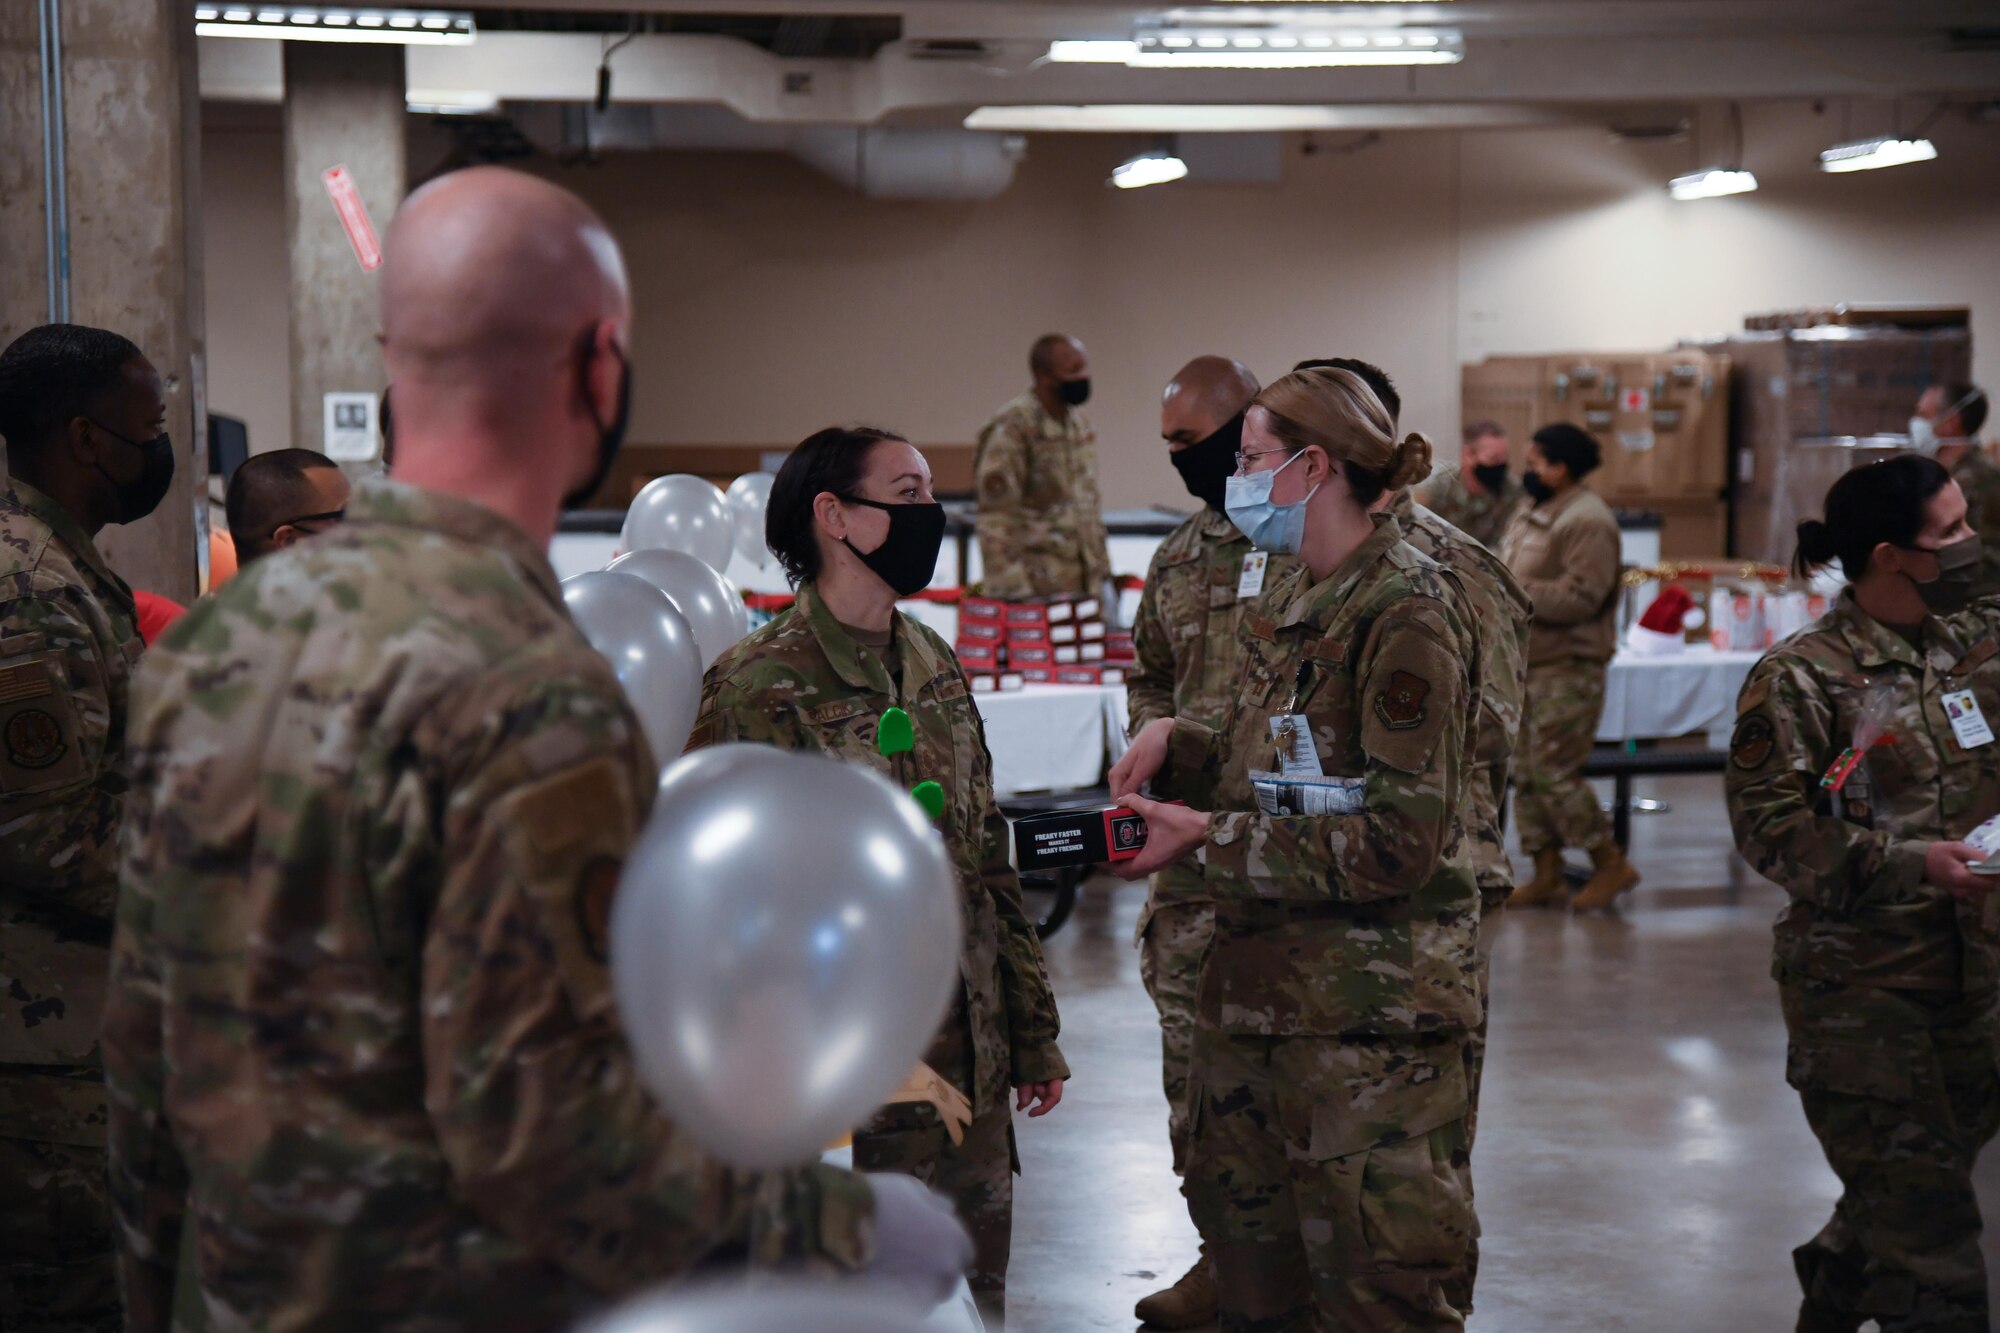 On Dec. 18, 2020, the 5th Medical Group hosted a “Medics-R-Awesome Day” for the medical professionals at Minot Air Force Base to honor and show appreciation for all that our medical professionals have done in the fight against COVID-19.